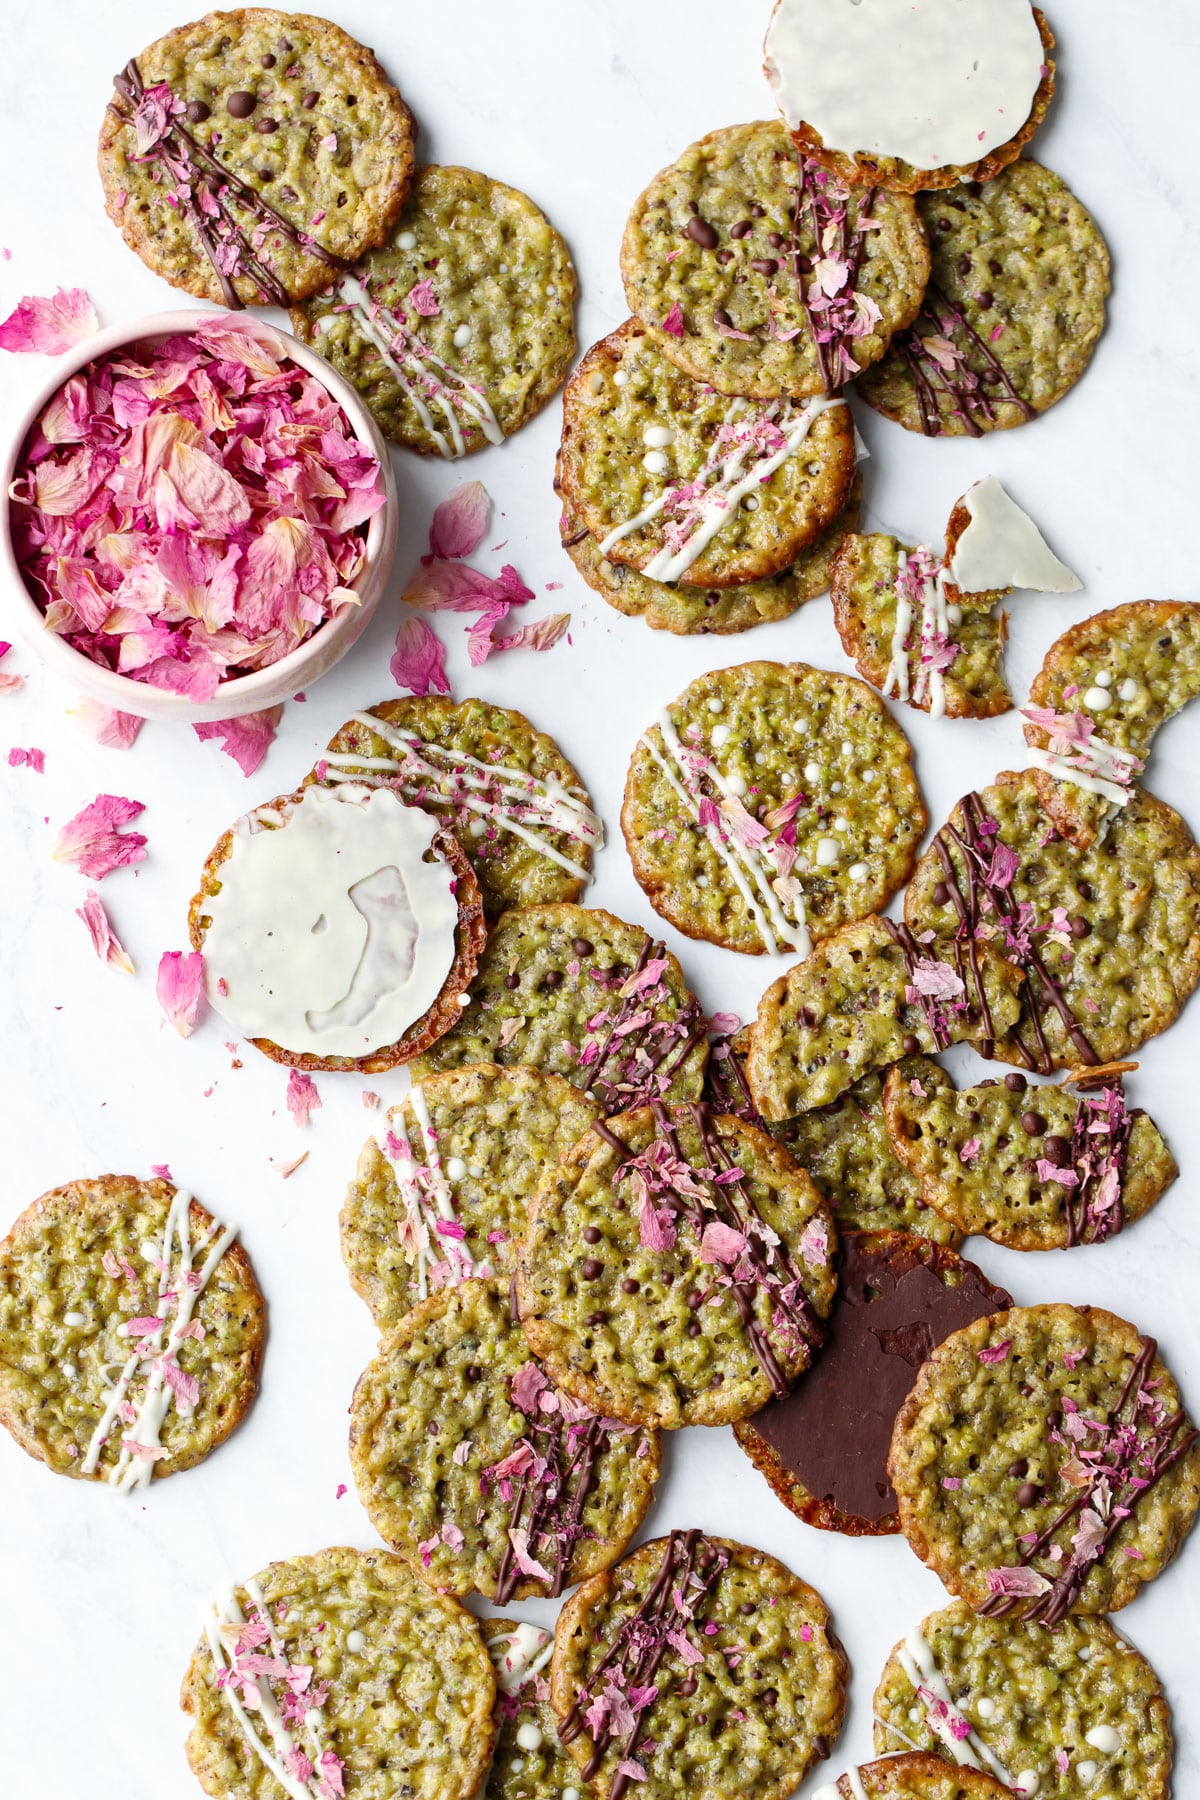 Overhead, messy scene with Pistachio Florentine Cookies, some broken and some upside down to show the chocolate and white-chocolate coated bottoms, with a bowl rose petals.